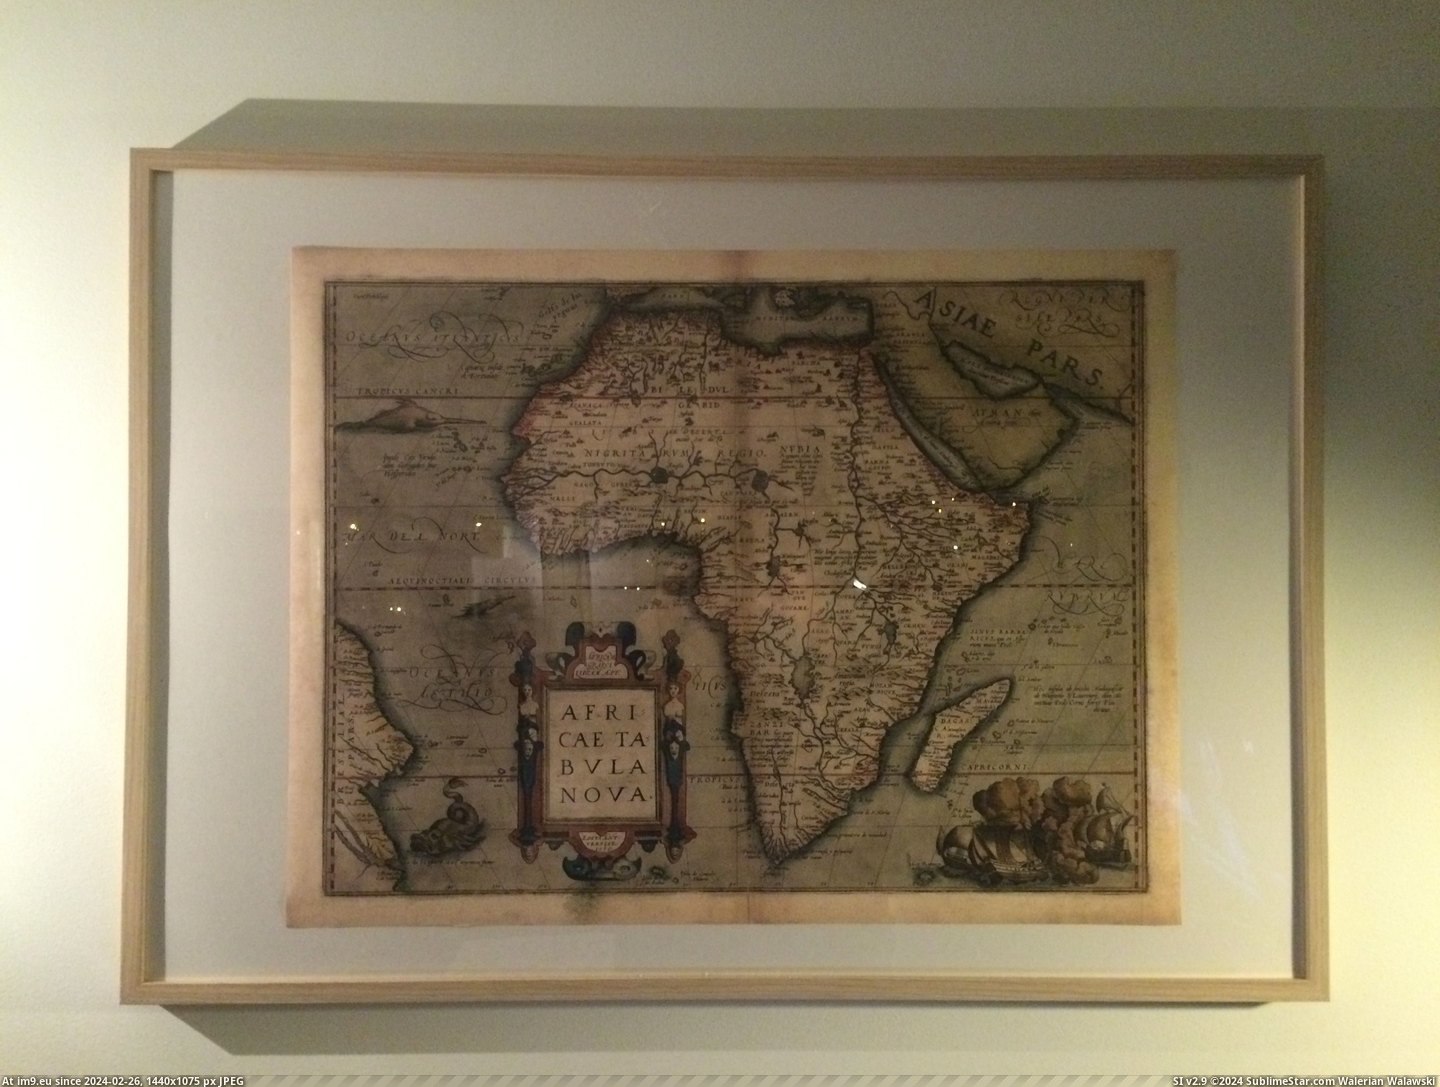 #White #Great #Map #Africa #Received #Replica #Spice #Way #Giant #Wall [Mapporn] Just received a replica of a 1570 map of Africa! Great way to spice up a giant white wall [3264 x 2448] Pic. (Obraz z album My r/MAPS favs))